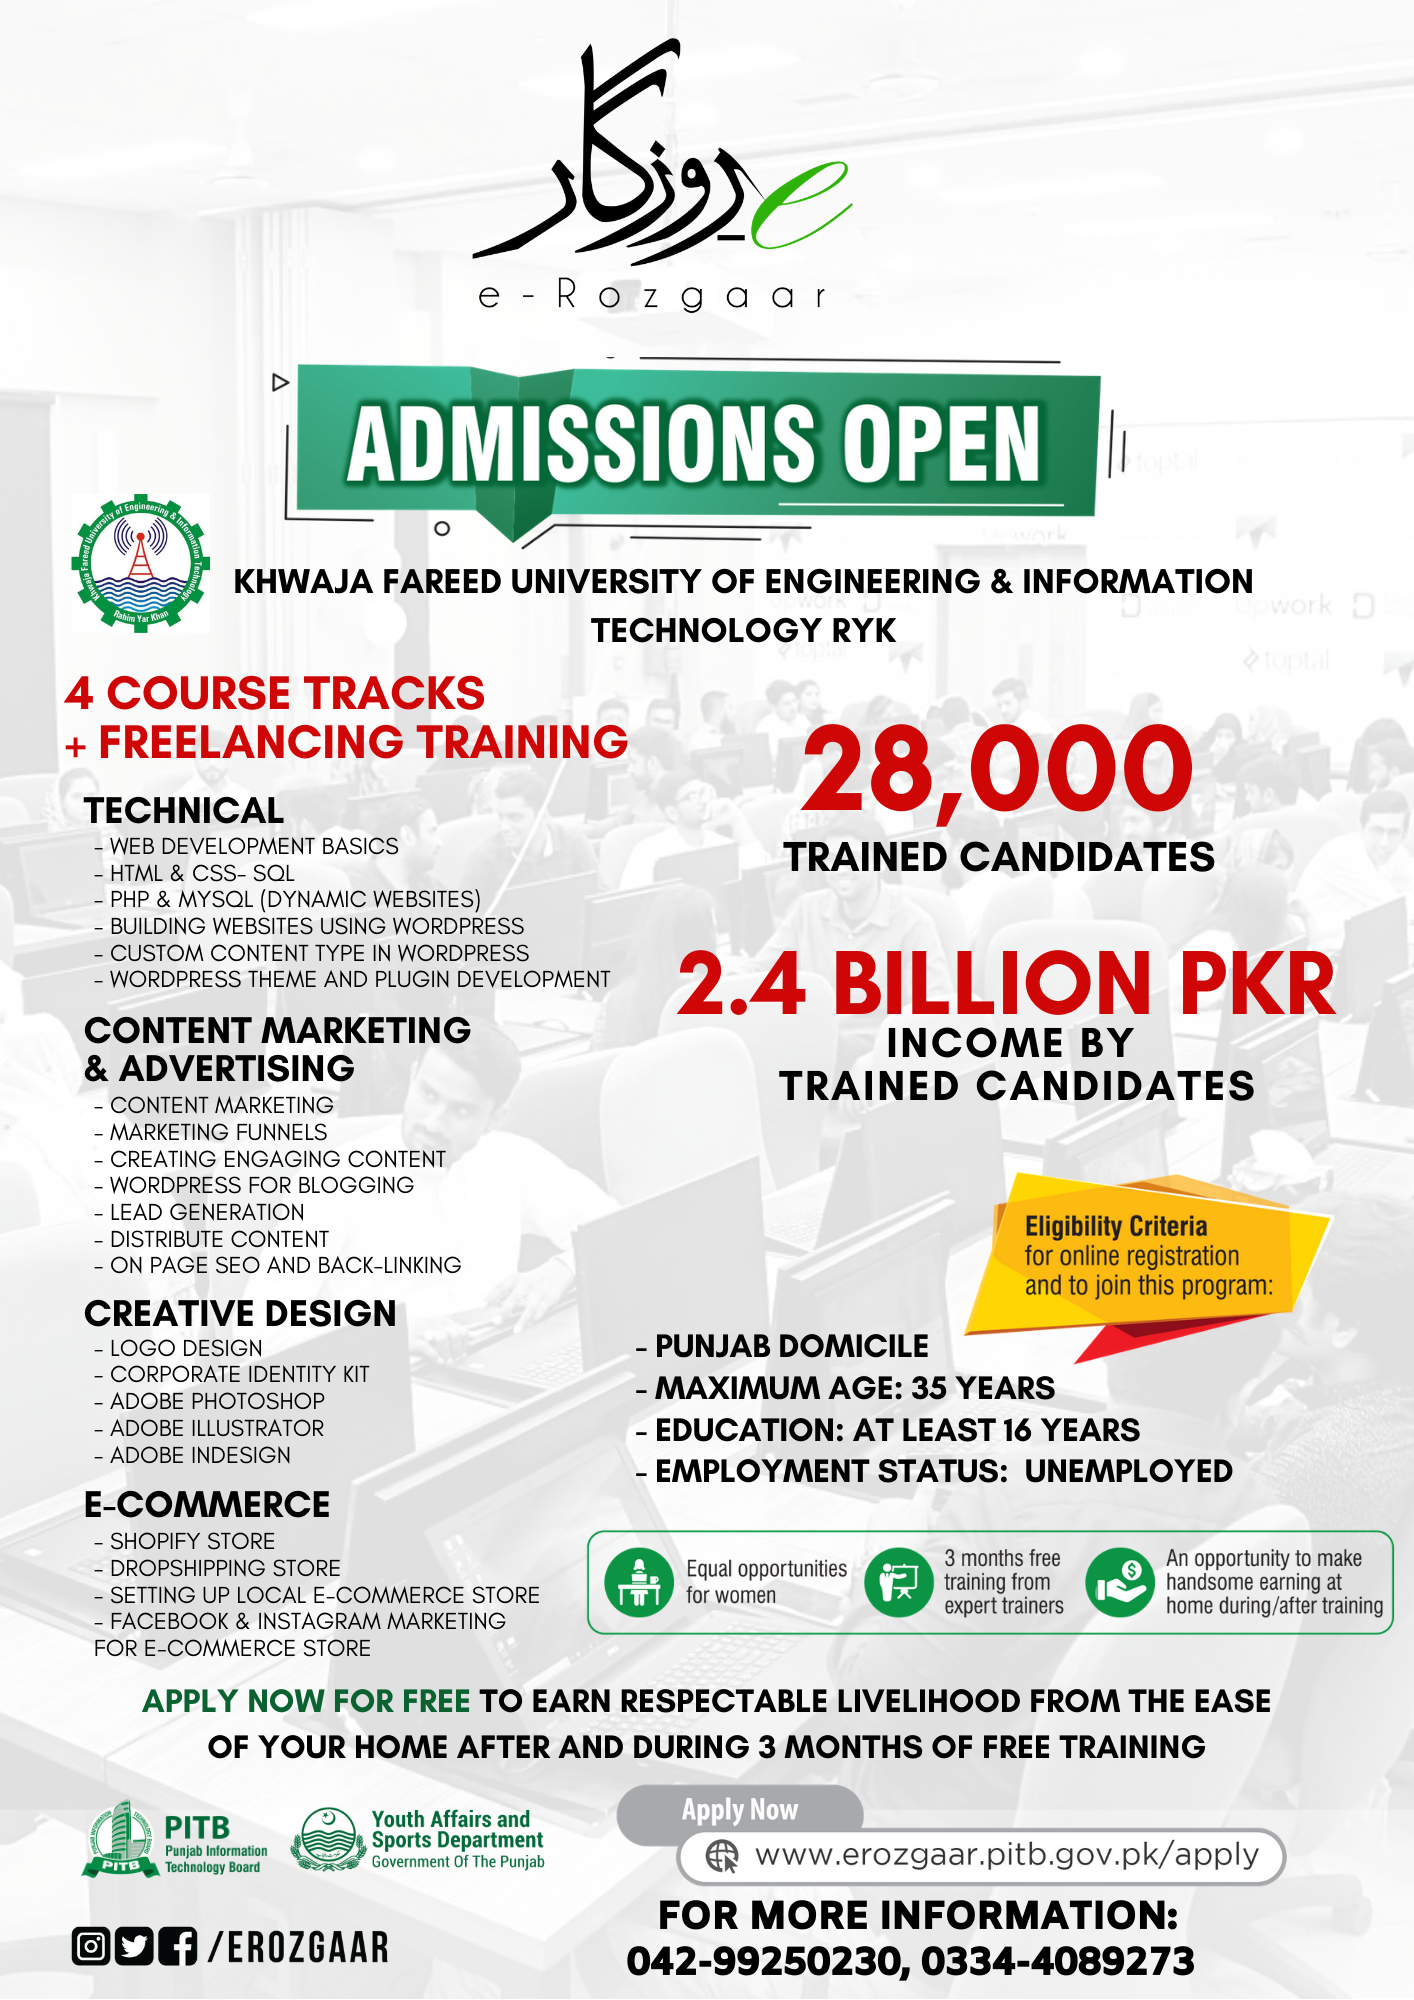 Copy of March 2021 Admissions Open